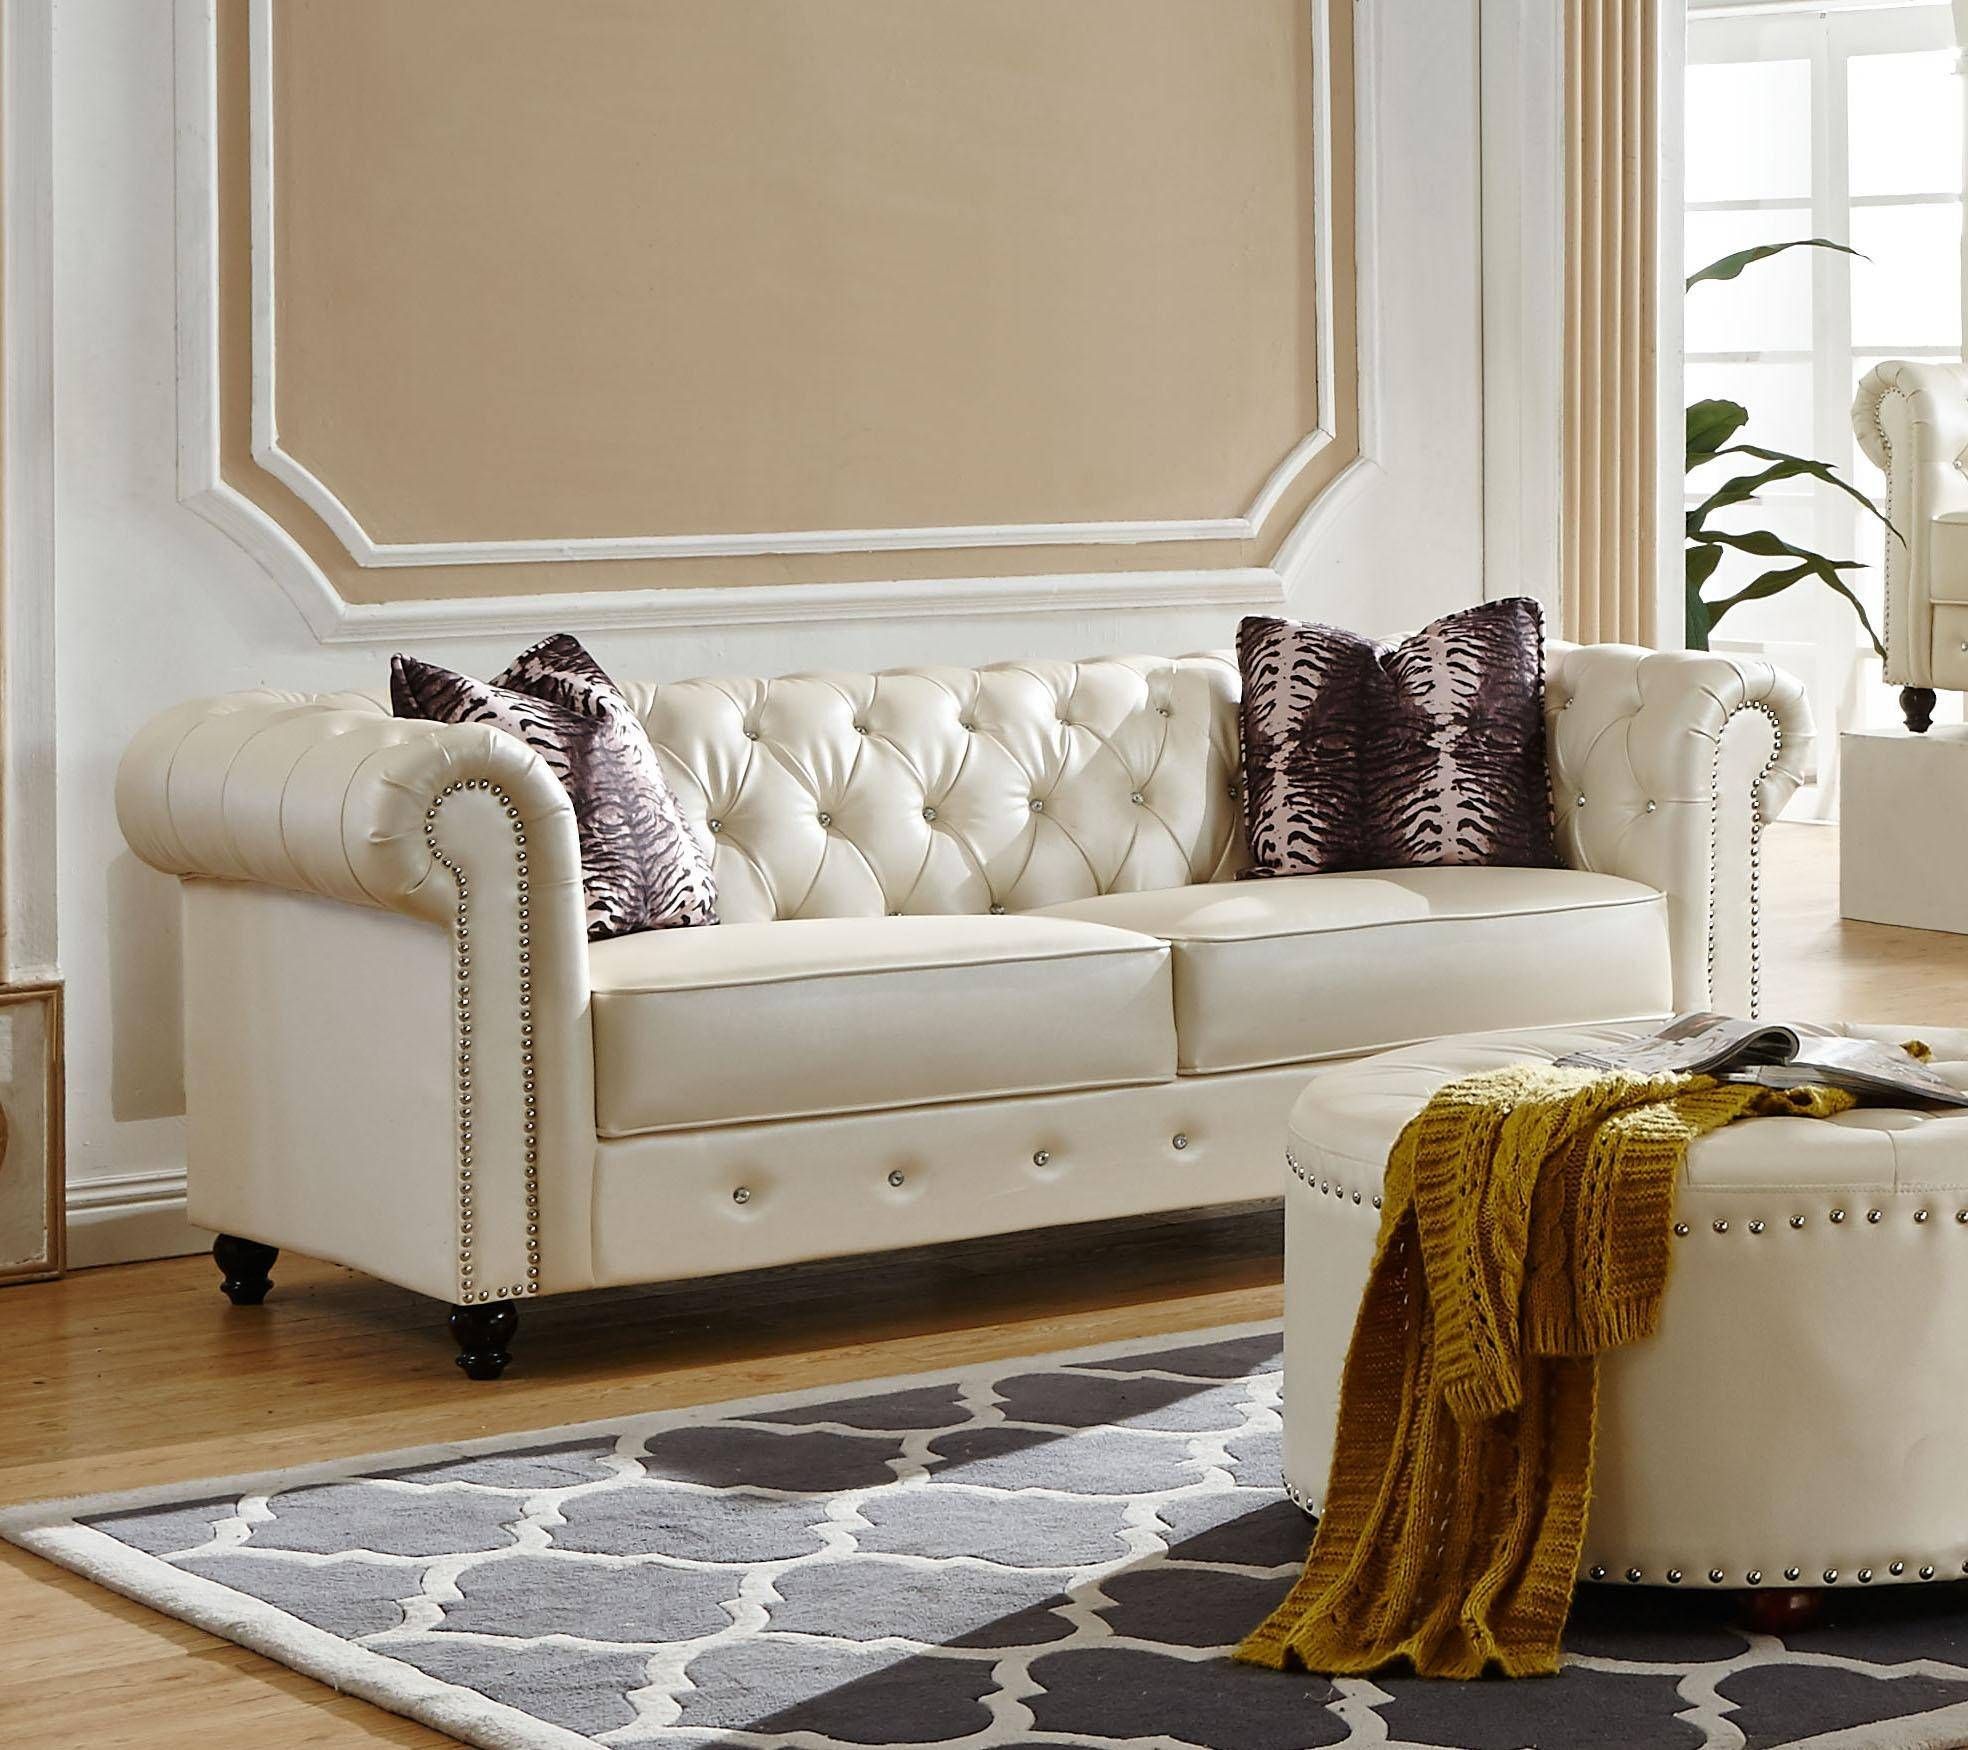 Mcferran Sf1802 Traditional White Pu Material Living Room Intended For Living Room Sofa Chairs (View 1 of 15)